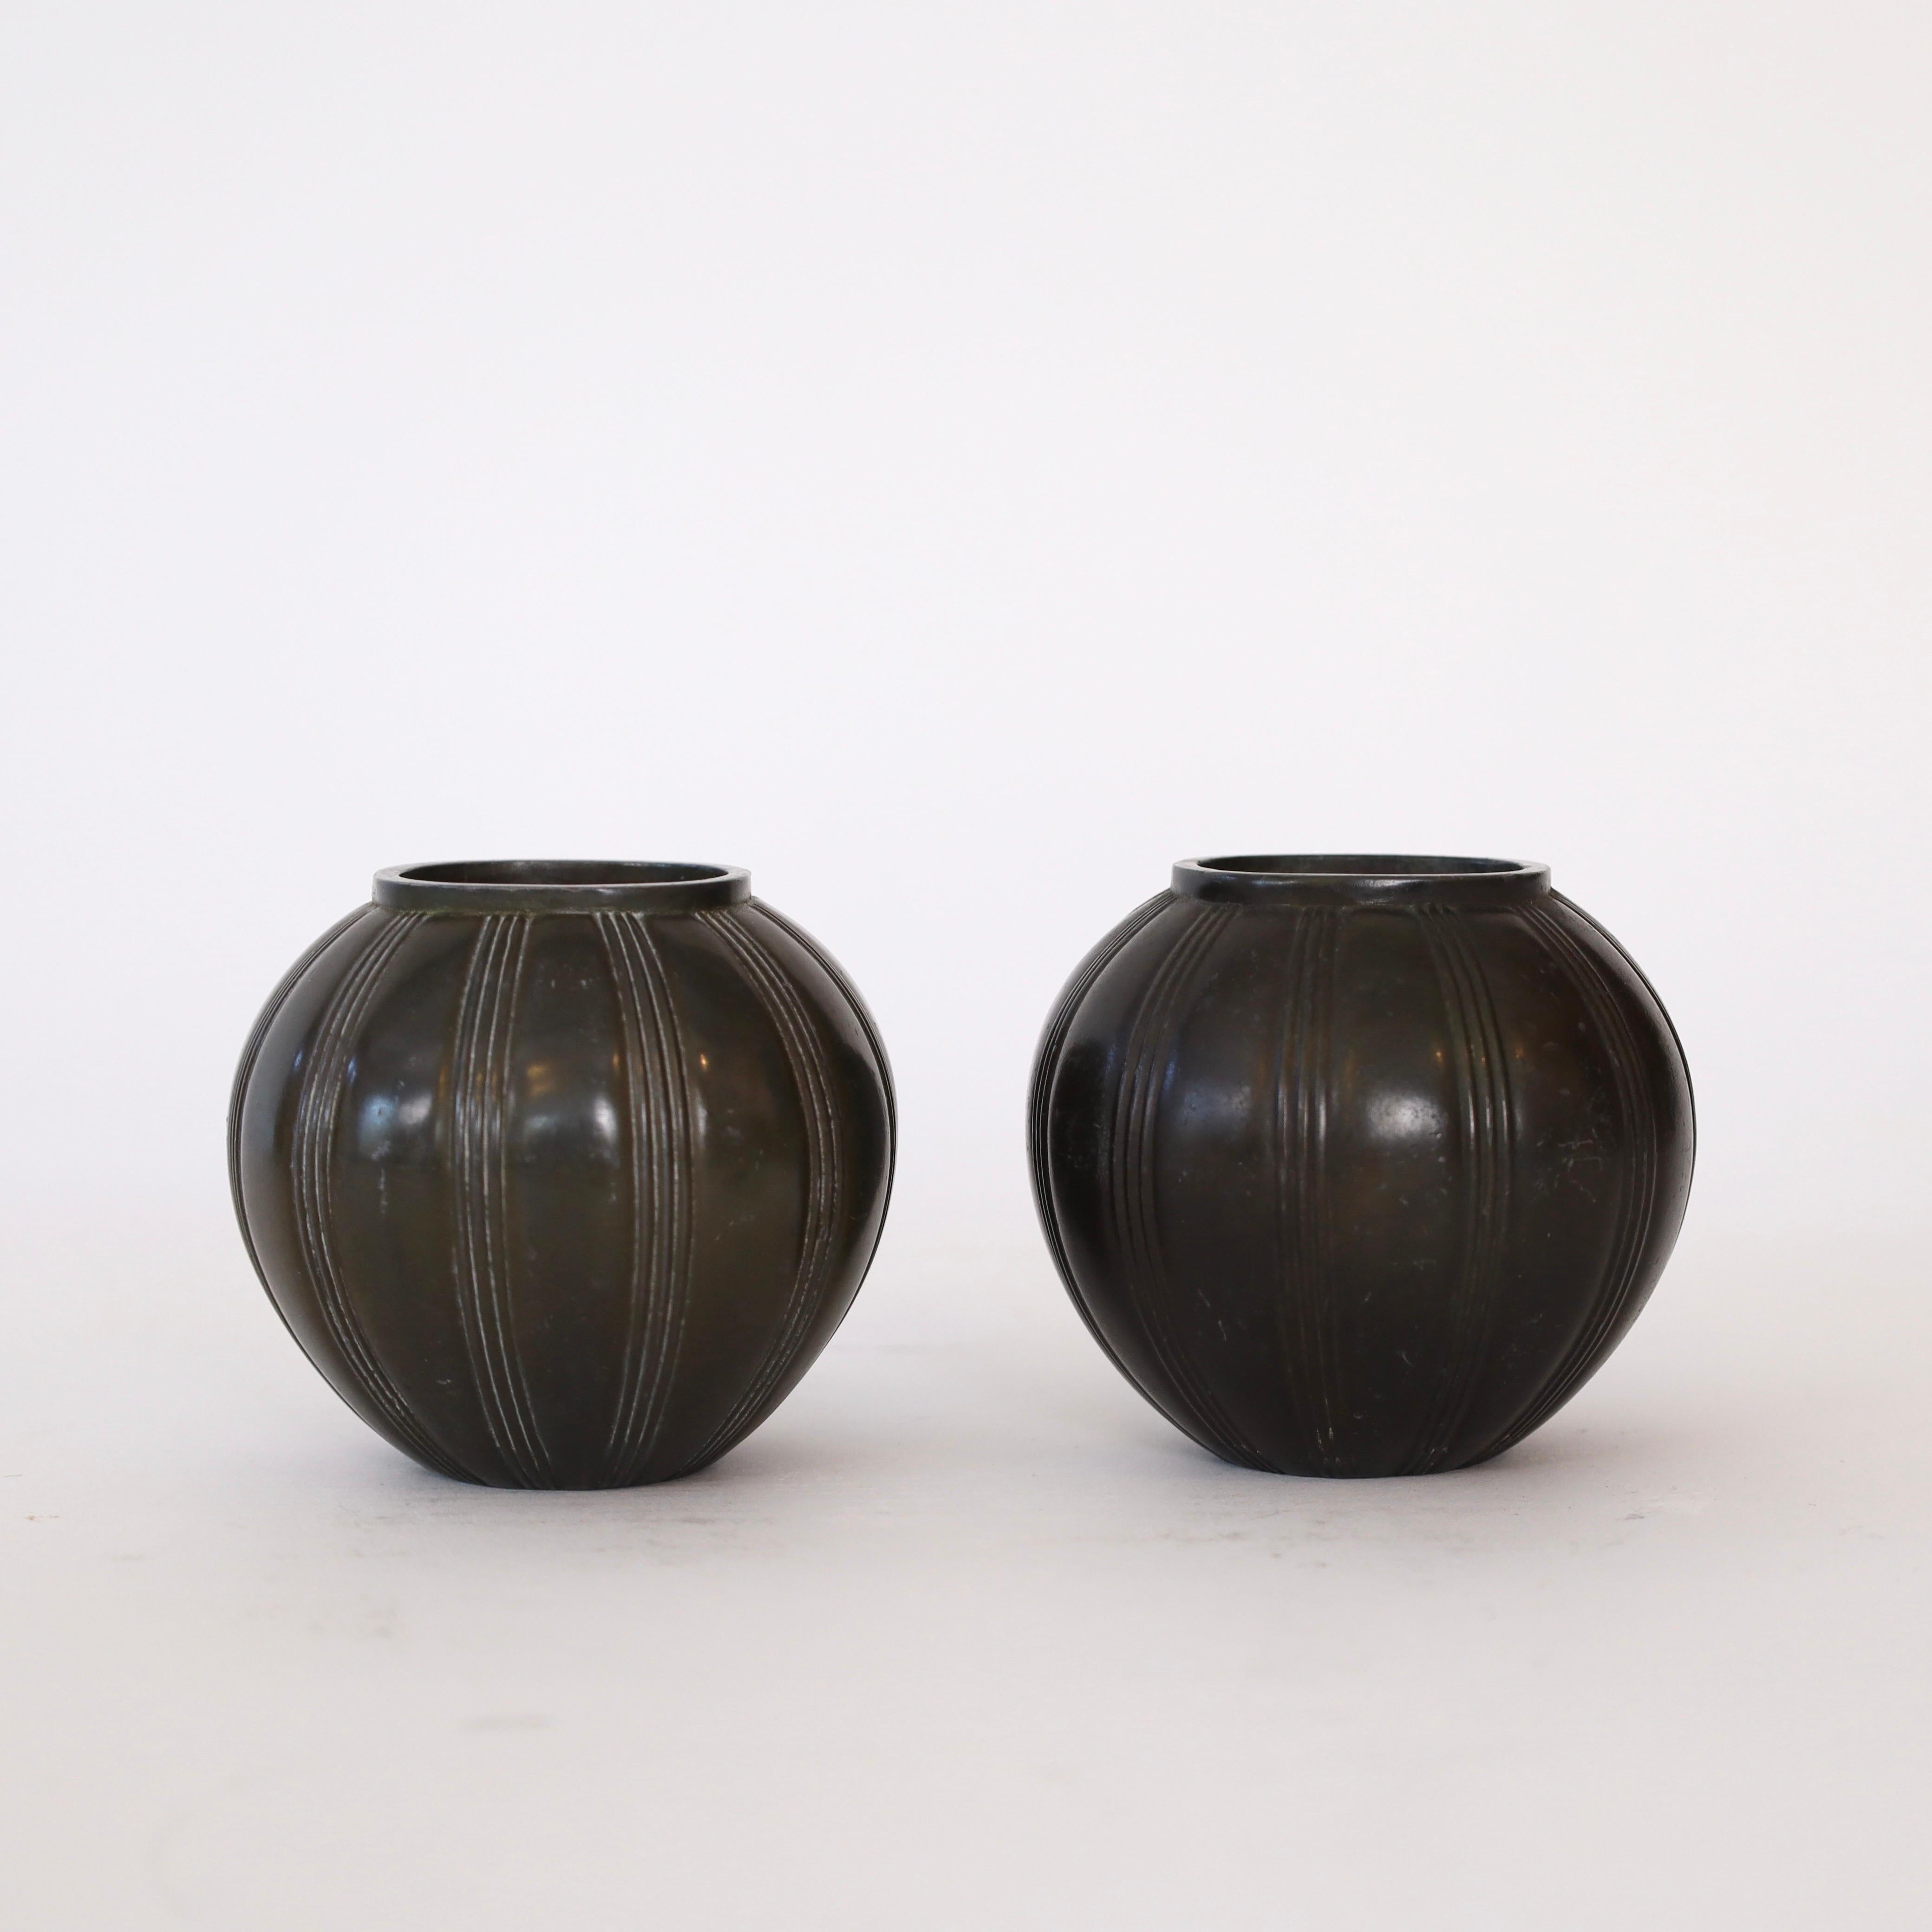 Metal Pair of Round Art Deco Vases by Just Andersen, 1930s, Denmark For Sale